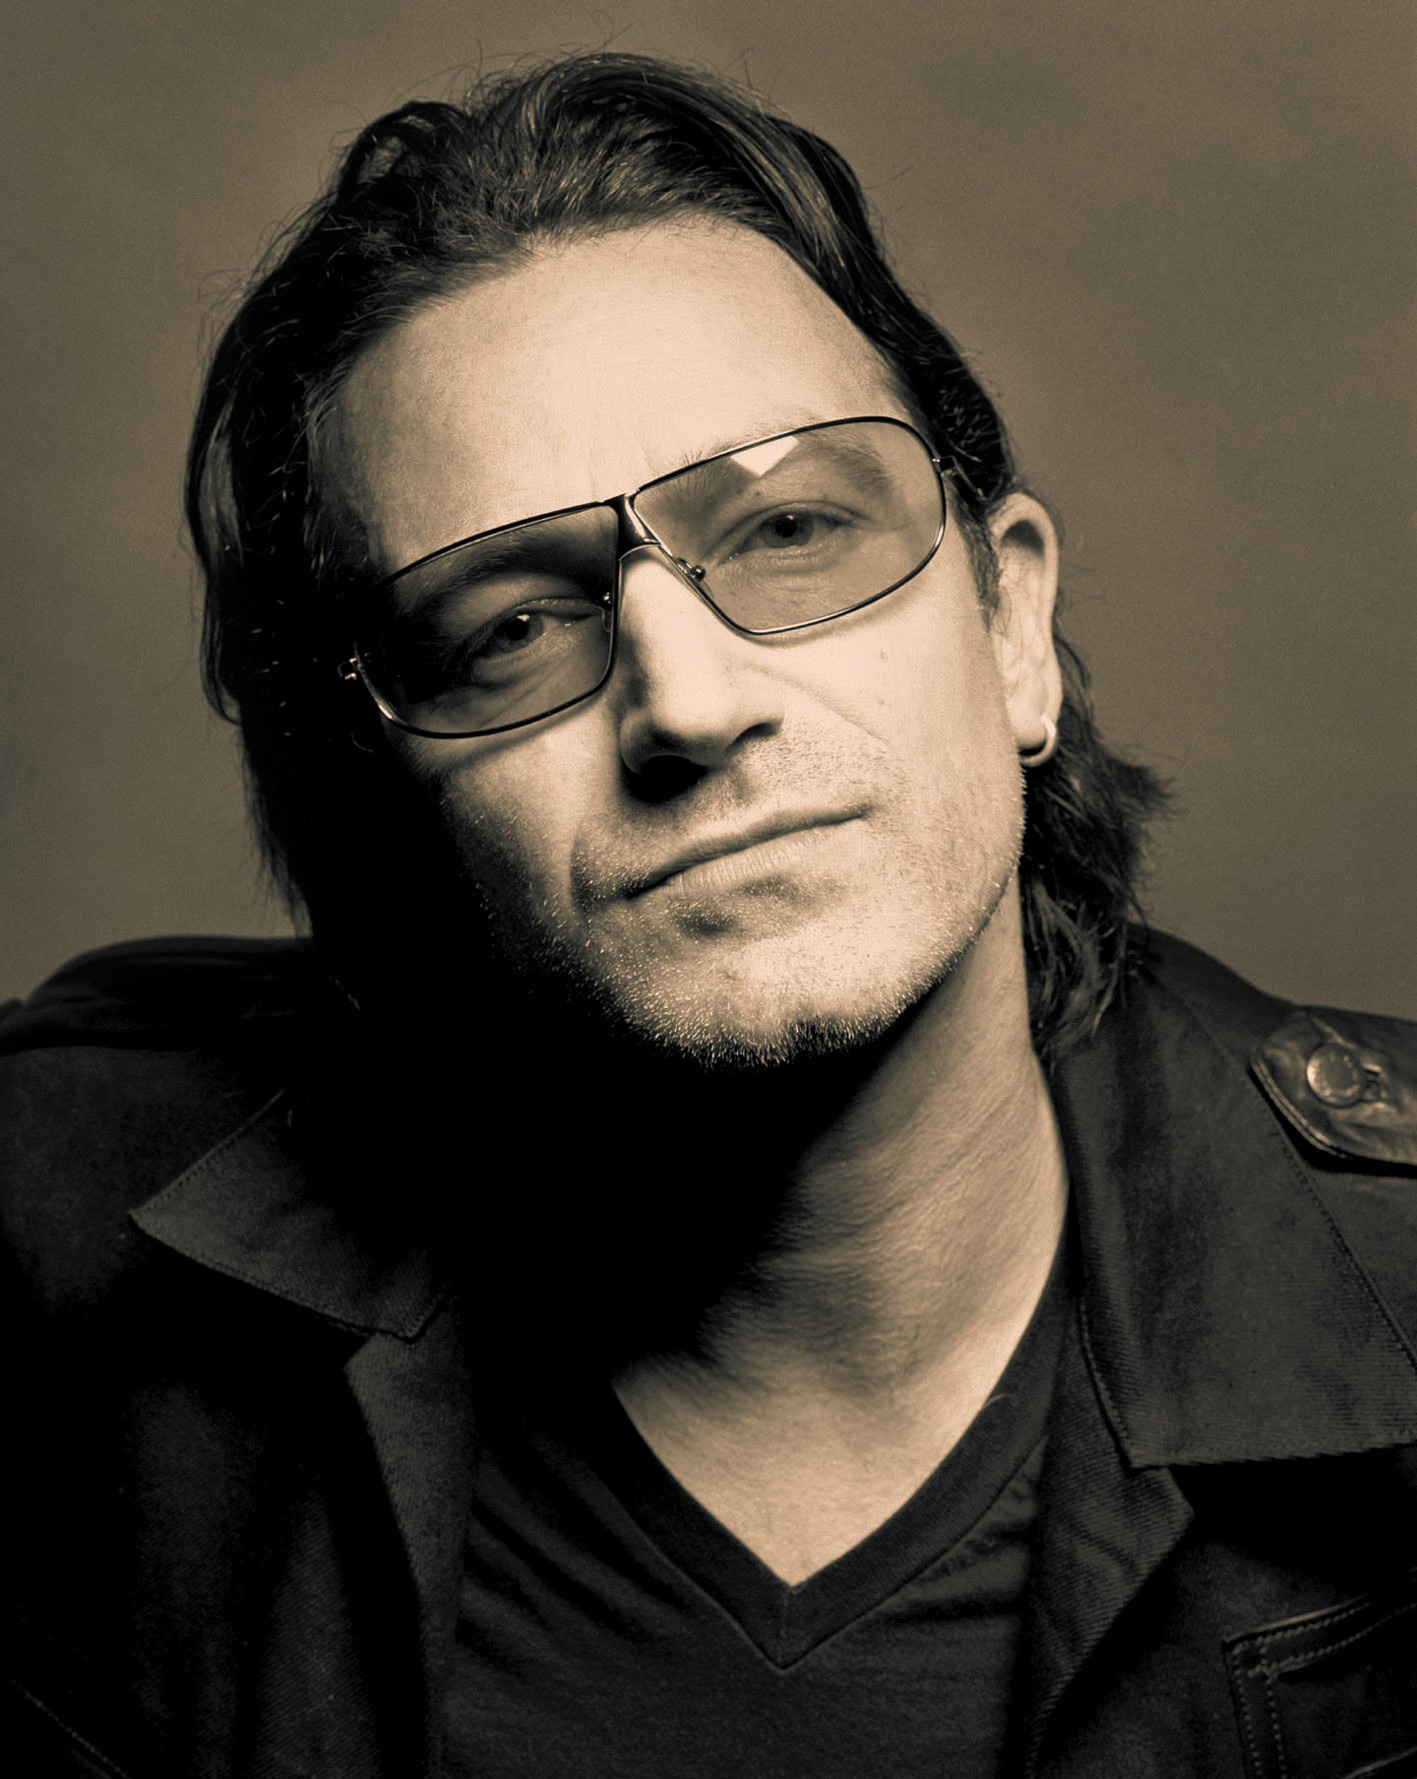 Christian radio program Focus on the Family interviewed the lead singer of rock band U2 about his faith in Christ and his social justice efforts around the world. Paul David Hewson, also known as “Bono,” is a global advocate of social justice for the poor. The singer was born in Ireland to a Protestant mother and a Catholic father, and met his wife of 30 years at the age of sixteen.